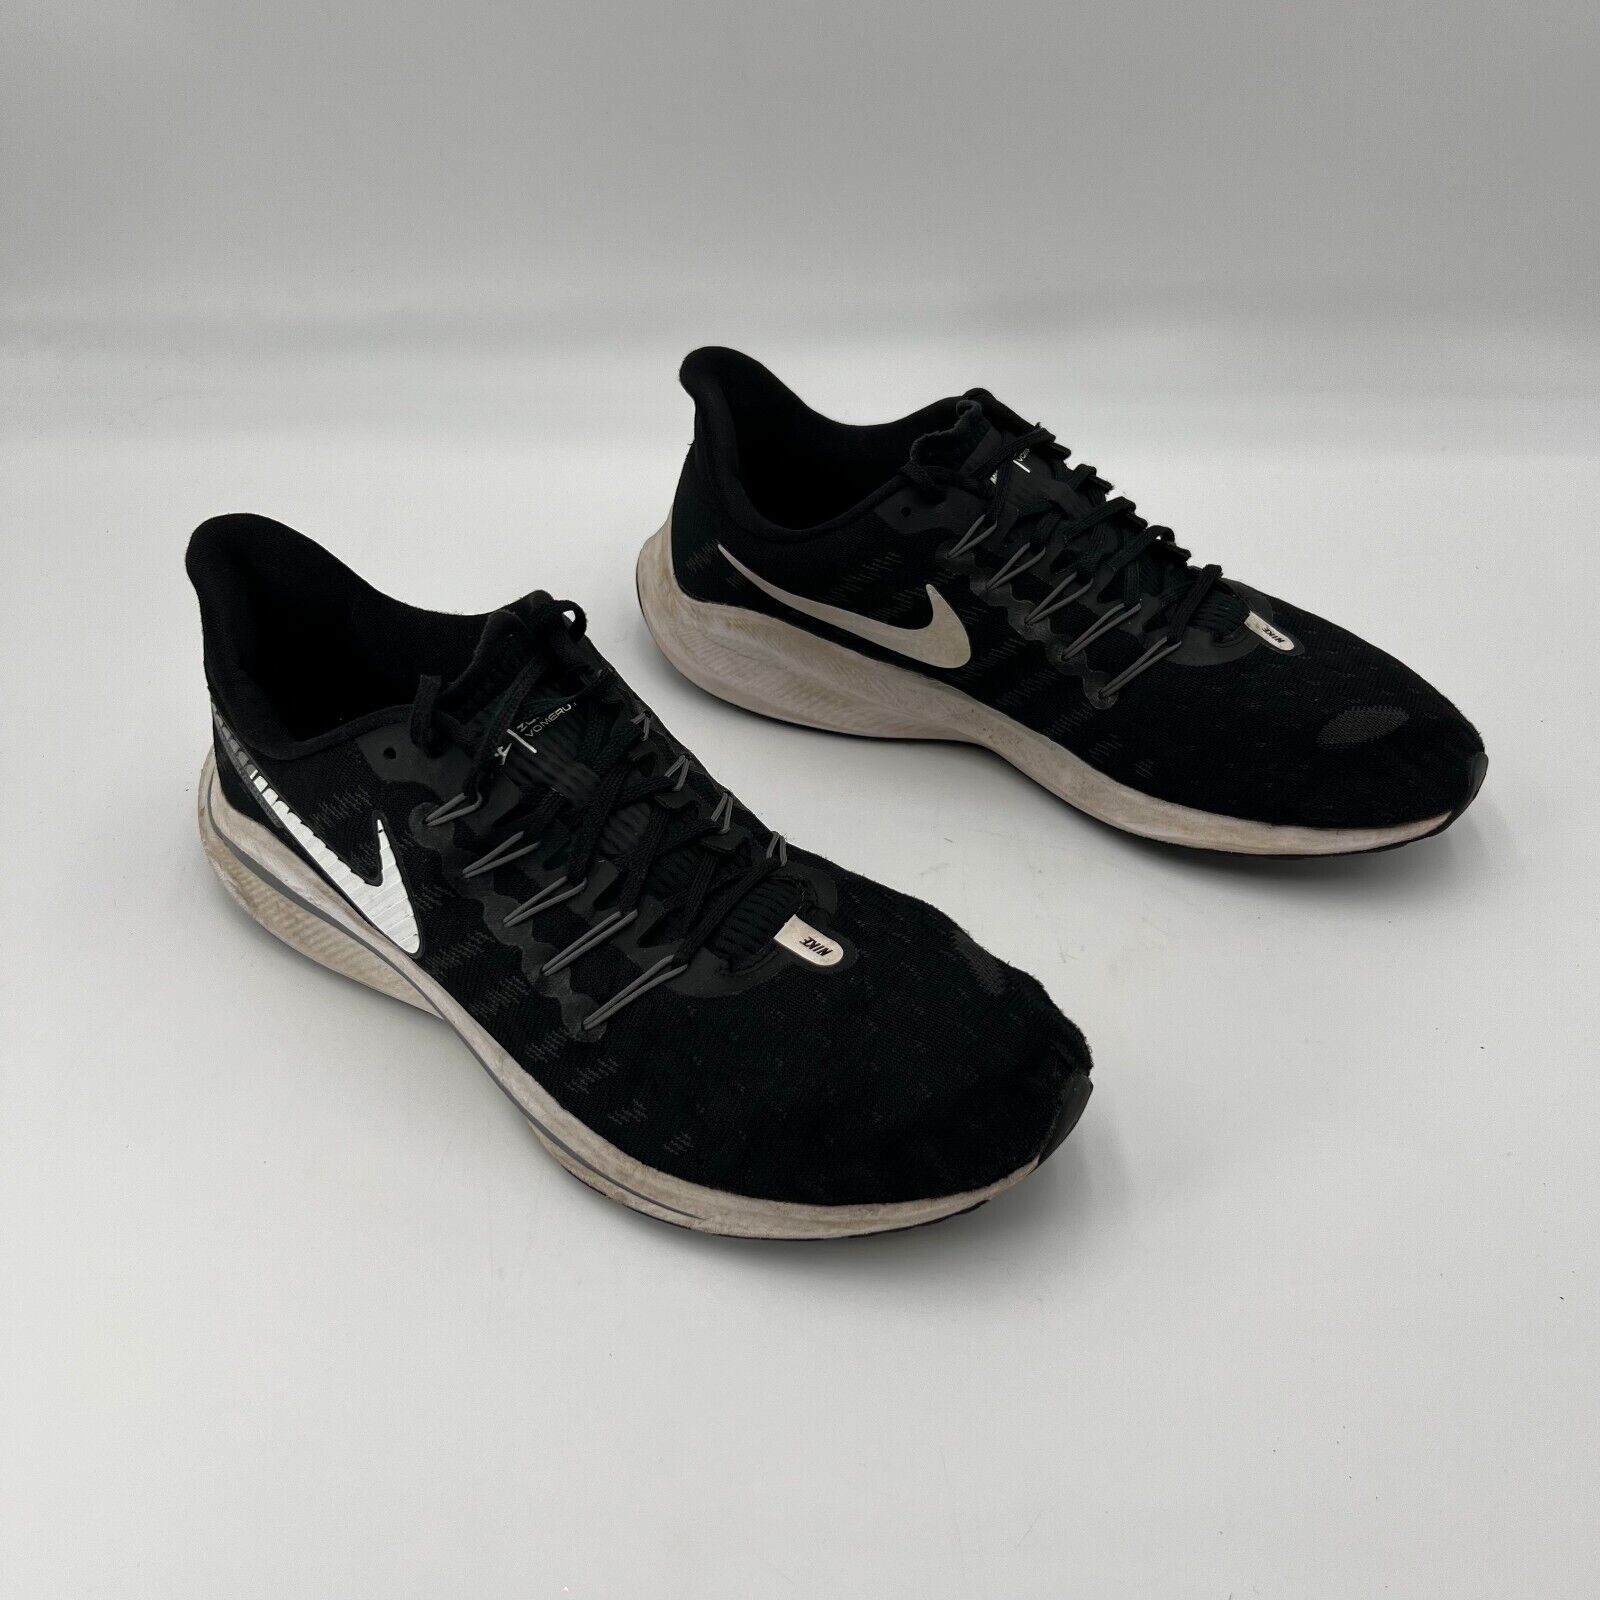 Nike Air Zoom Vomero Black White Swoosh Running Shoes Sneakers Womens Size 12